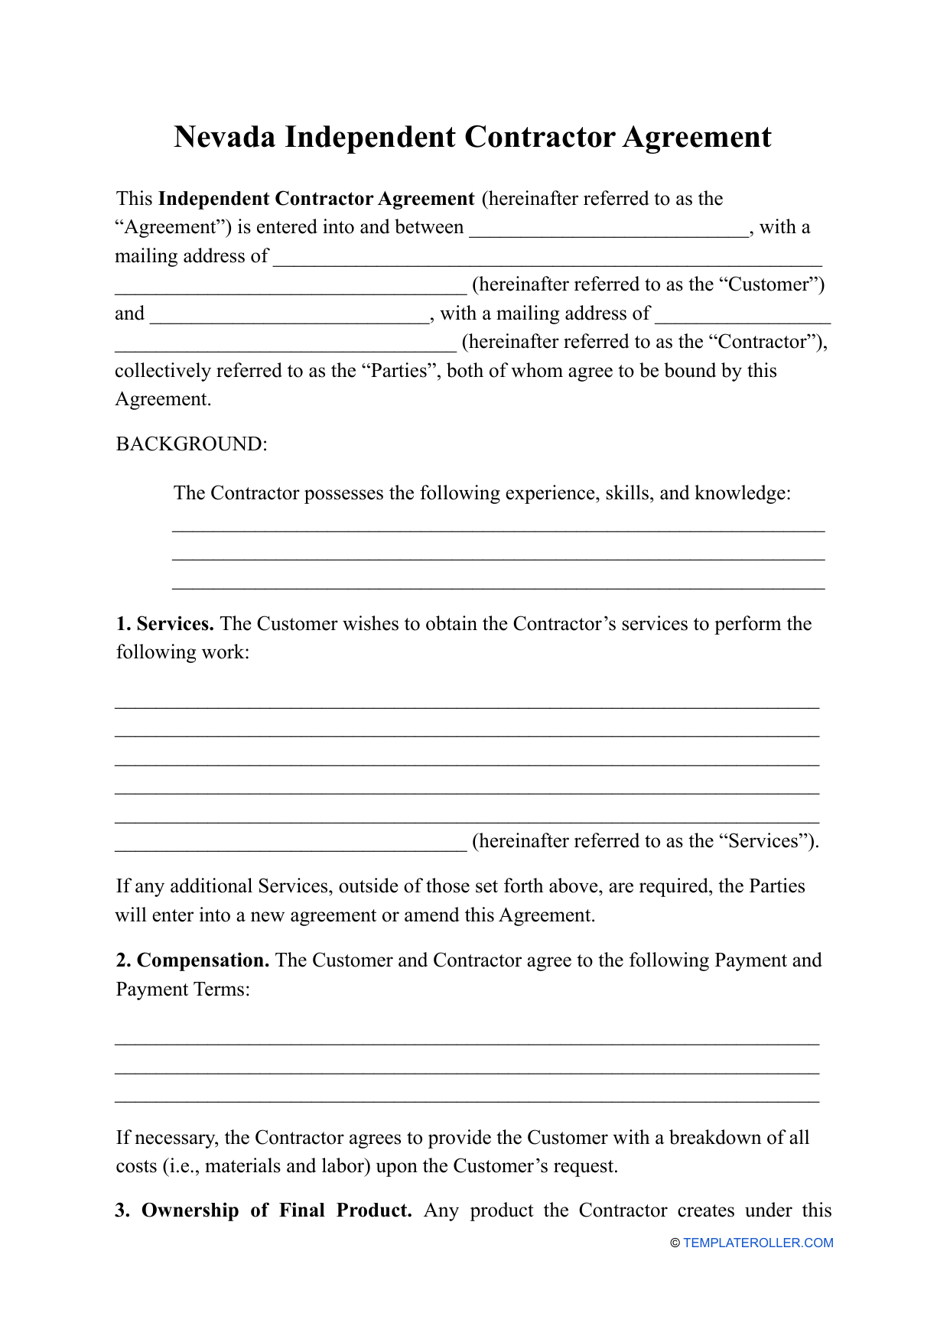 Independent Contractor Agreement Template - Nevada, Page 1